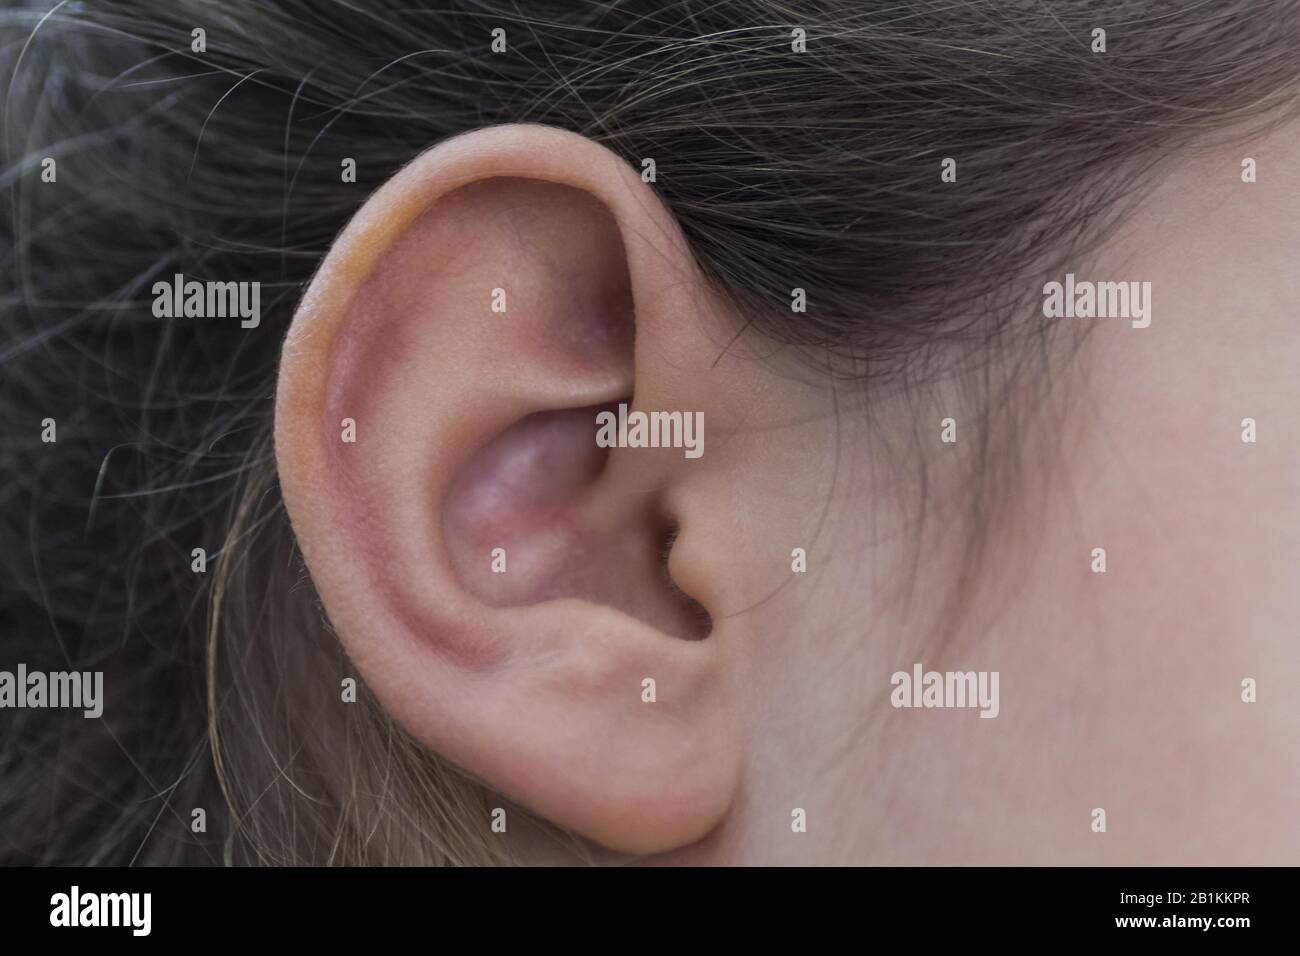 close-up of a right ear Stock Photo